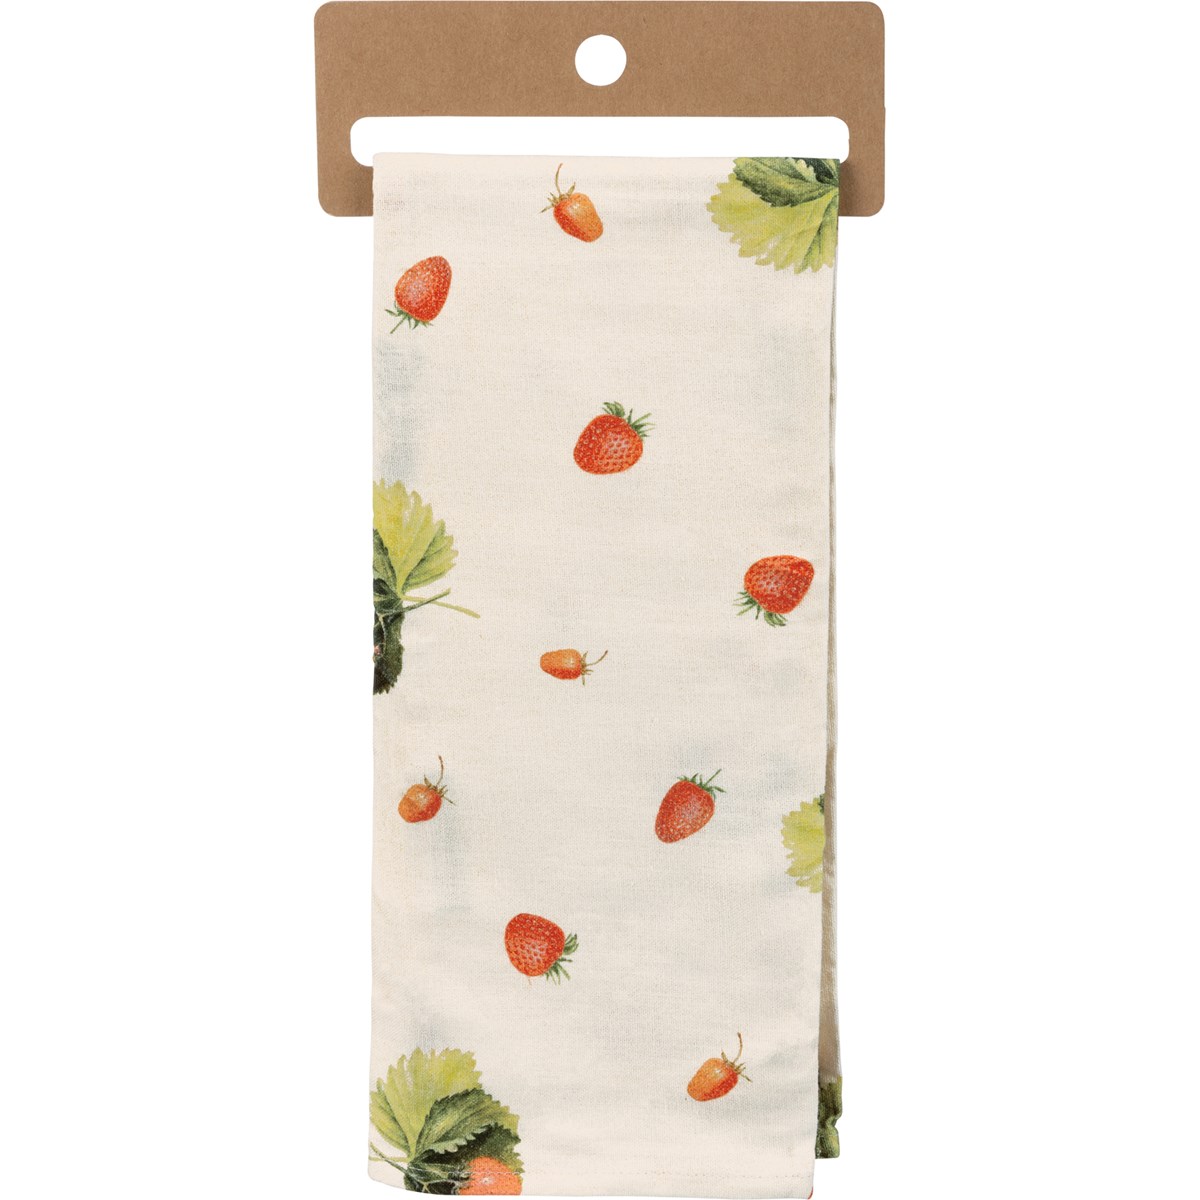 I Love You Berry Much Kitchen Towel - Cotton, Linen